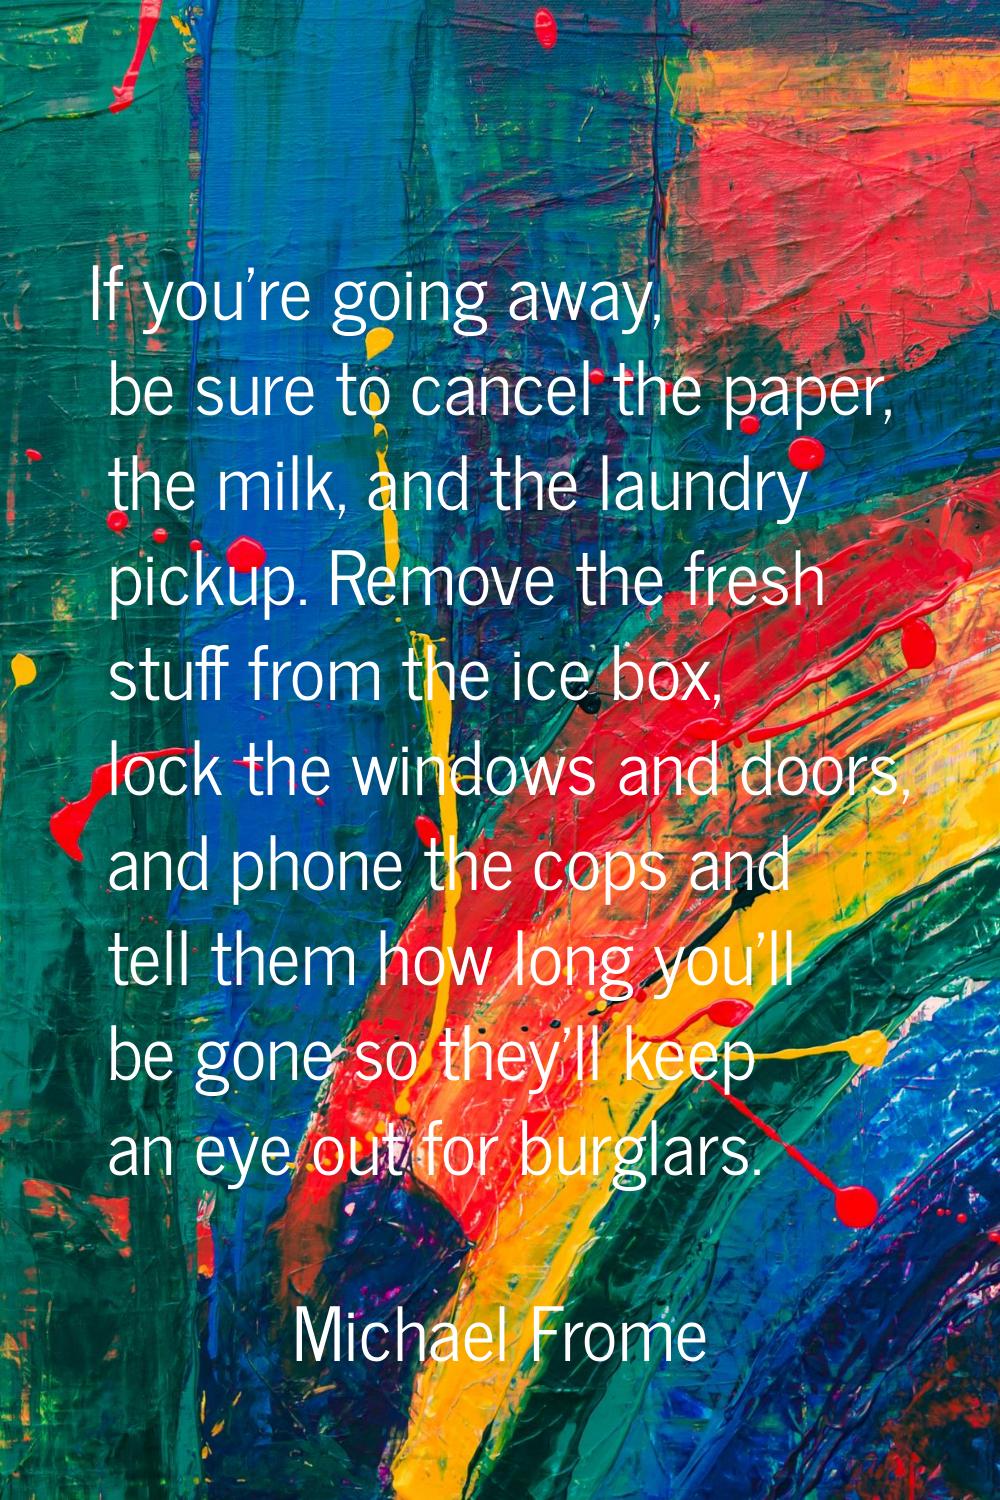 If you're going away, be sure to cancel the paper, the milk, and the laundry pickup. Remove the fre